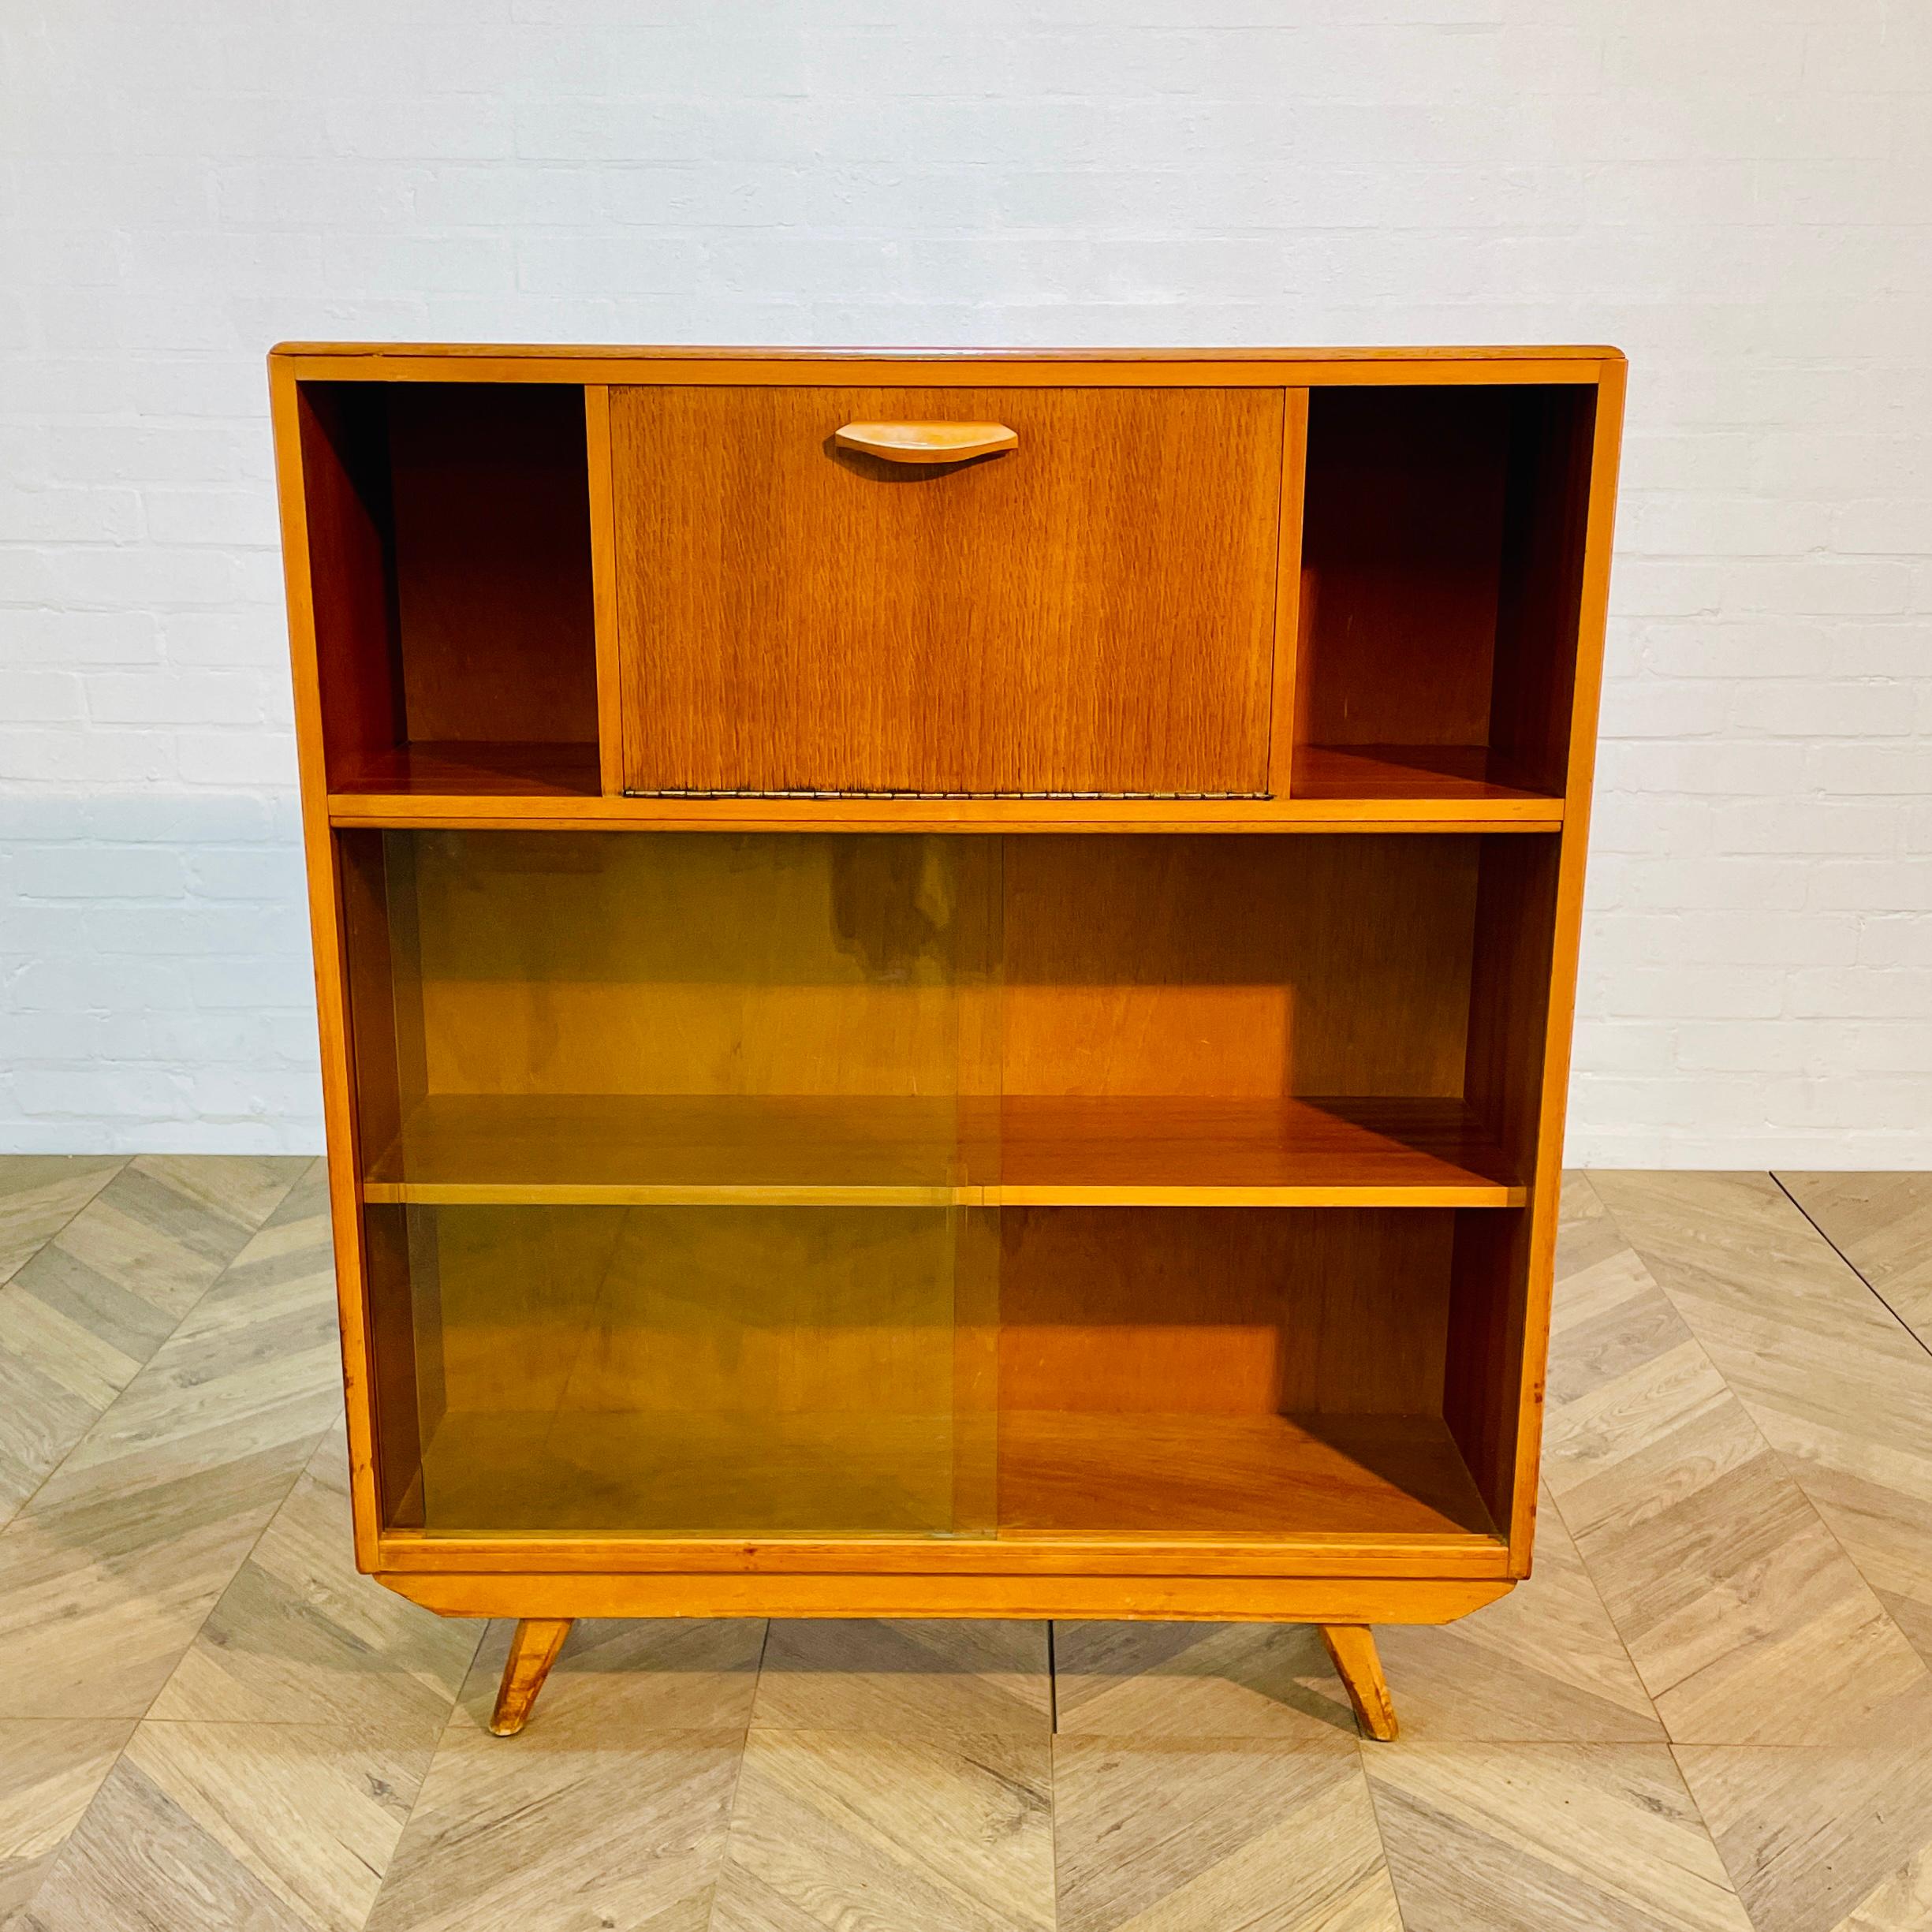 Oak Mid-Century Sideboard Display Cabinet, Made by Avalon, 1960s For Sale